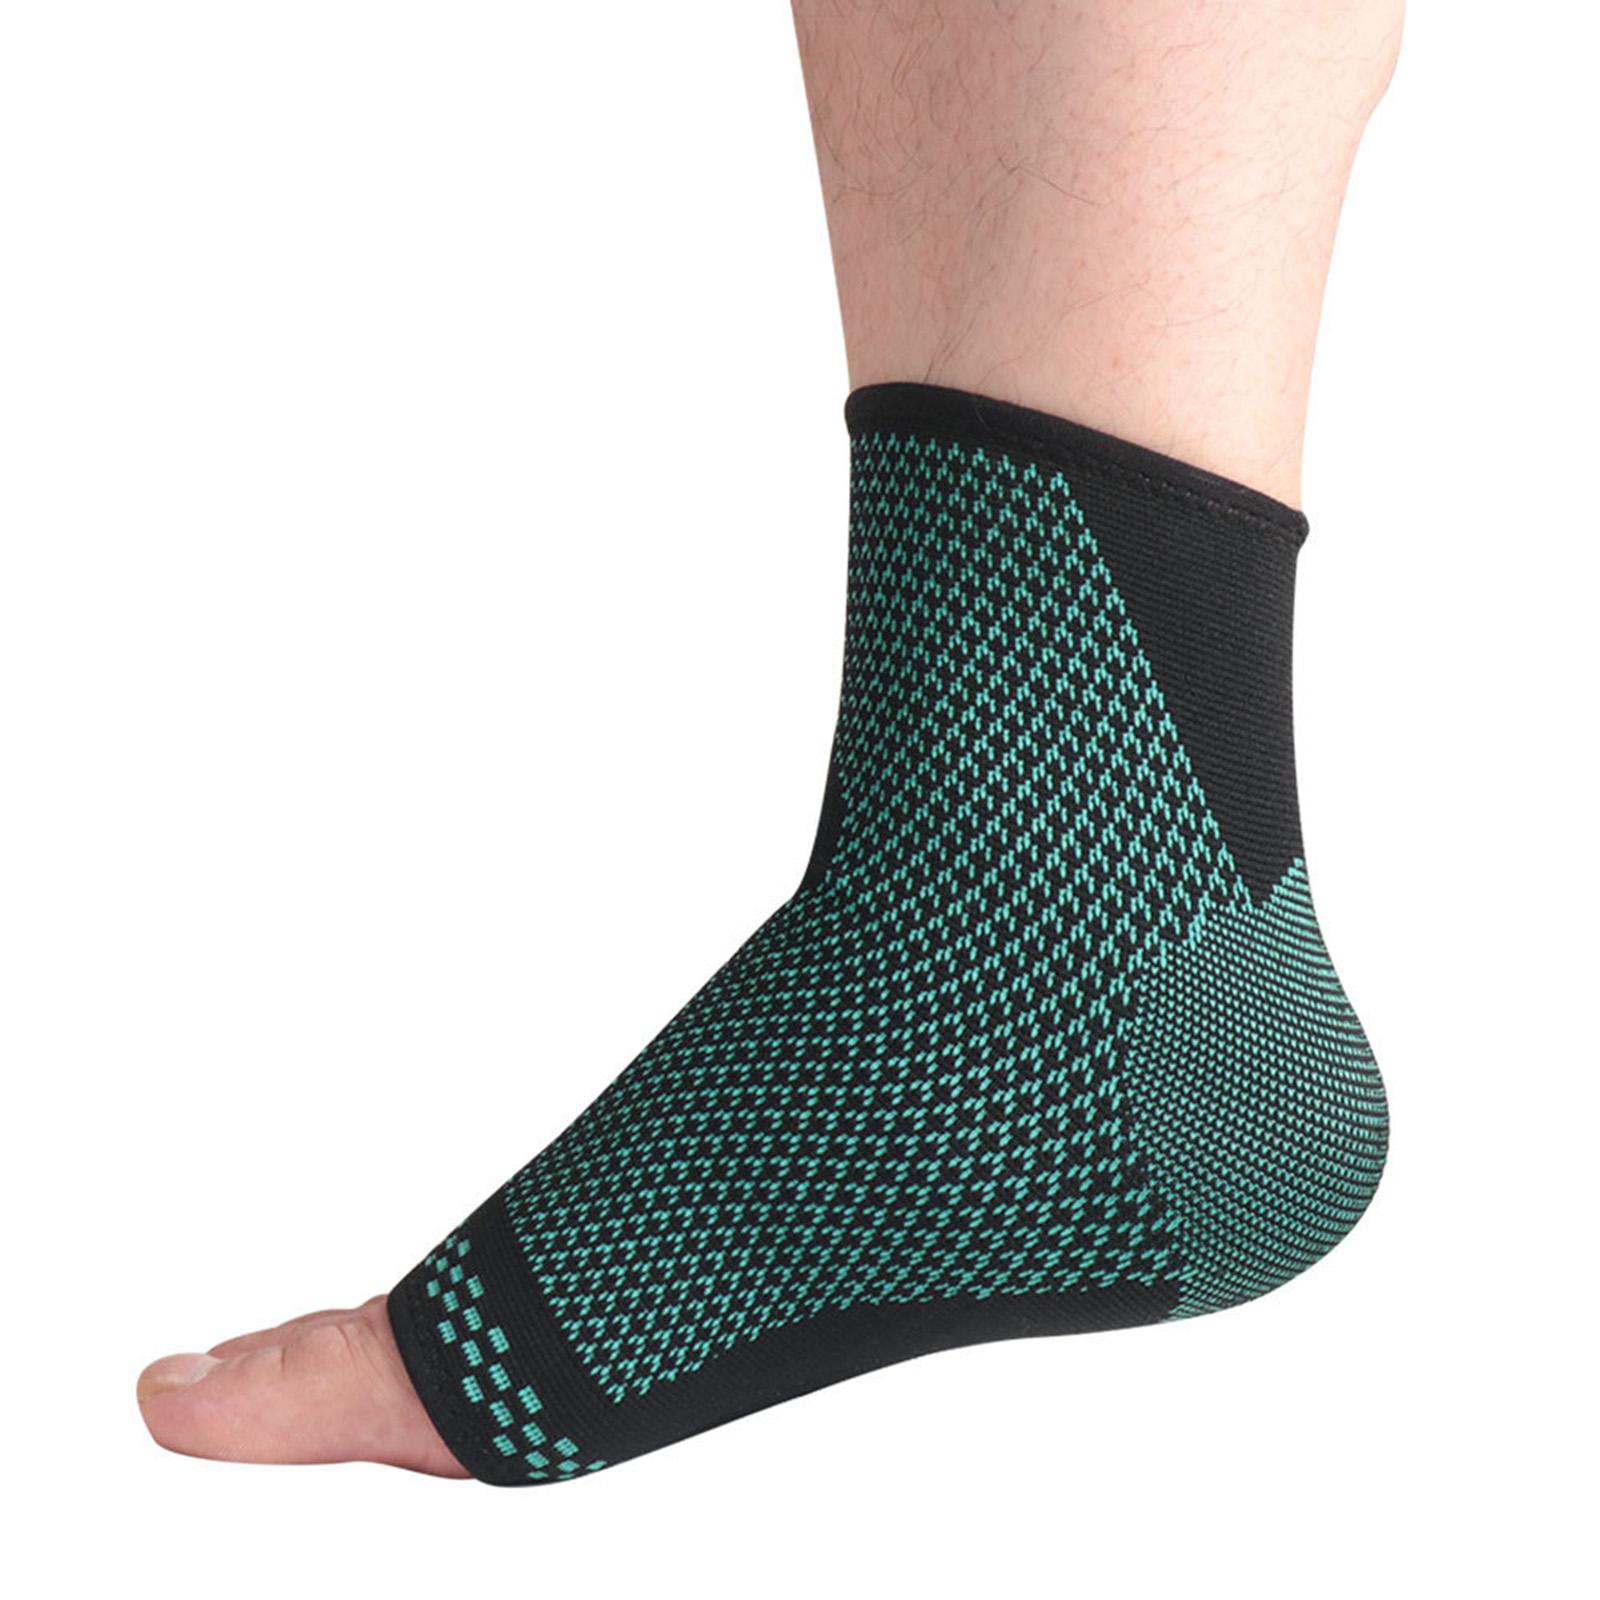 Foot Sleeve Anti Fatigue Foot Protection for Basketball Sports Men Women XL